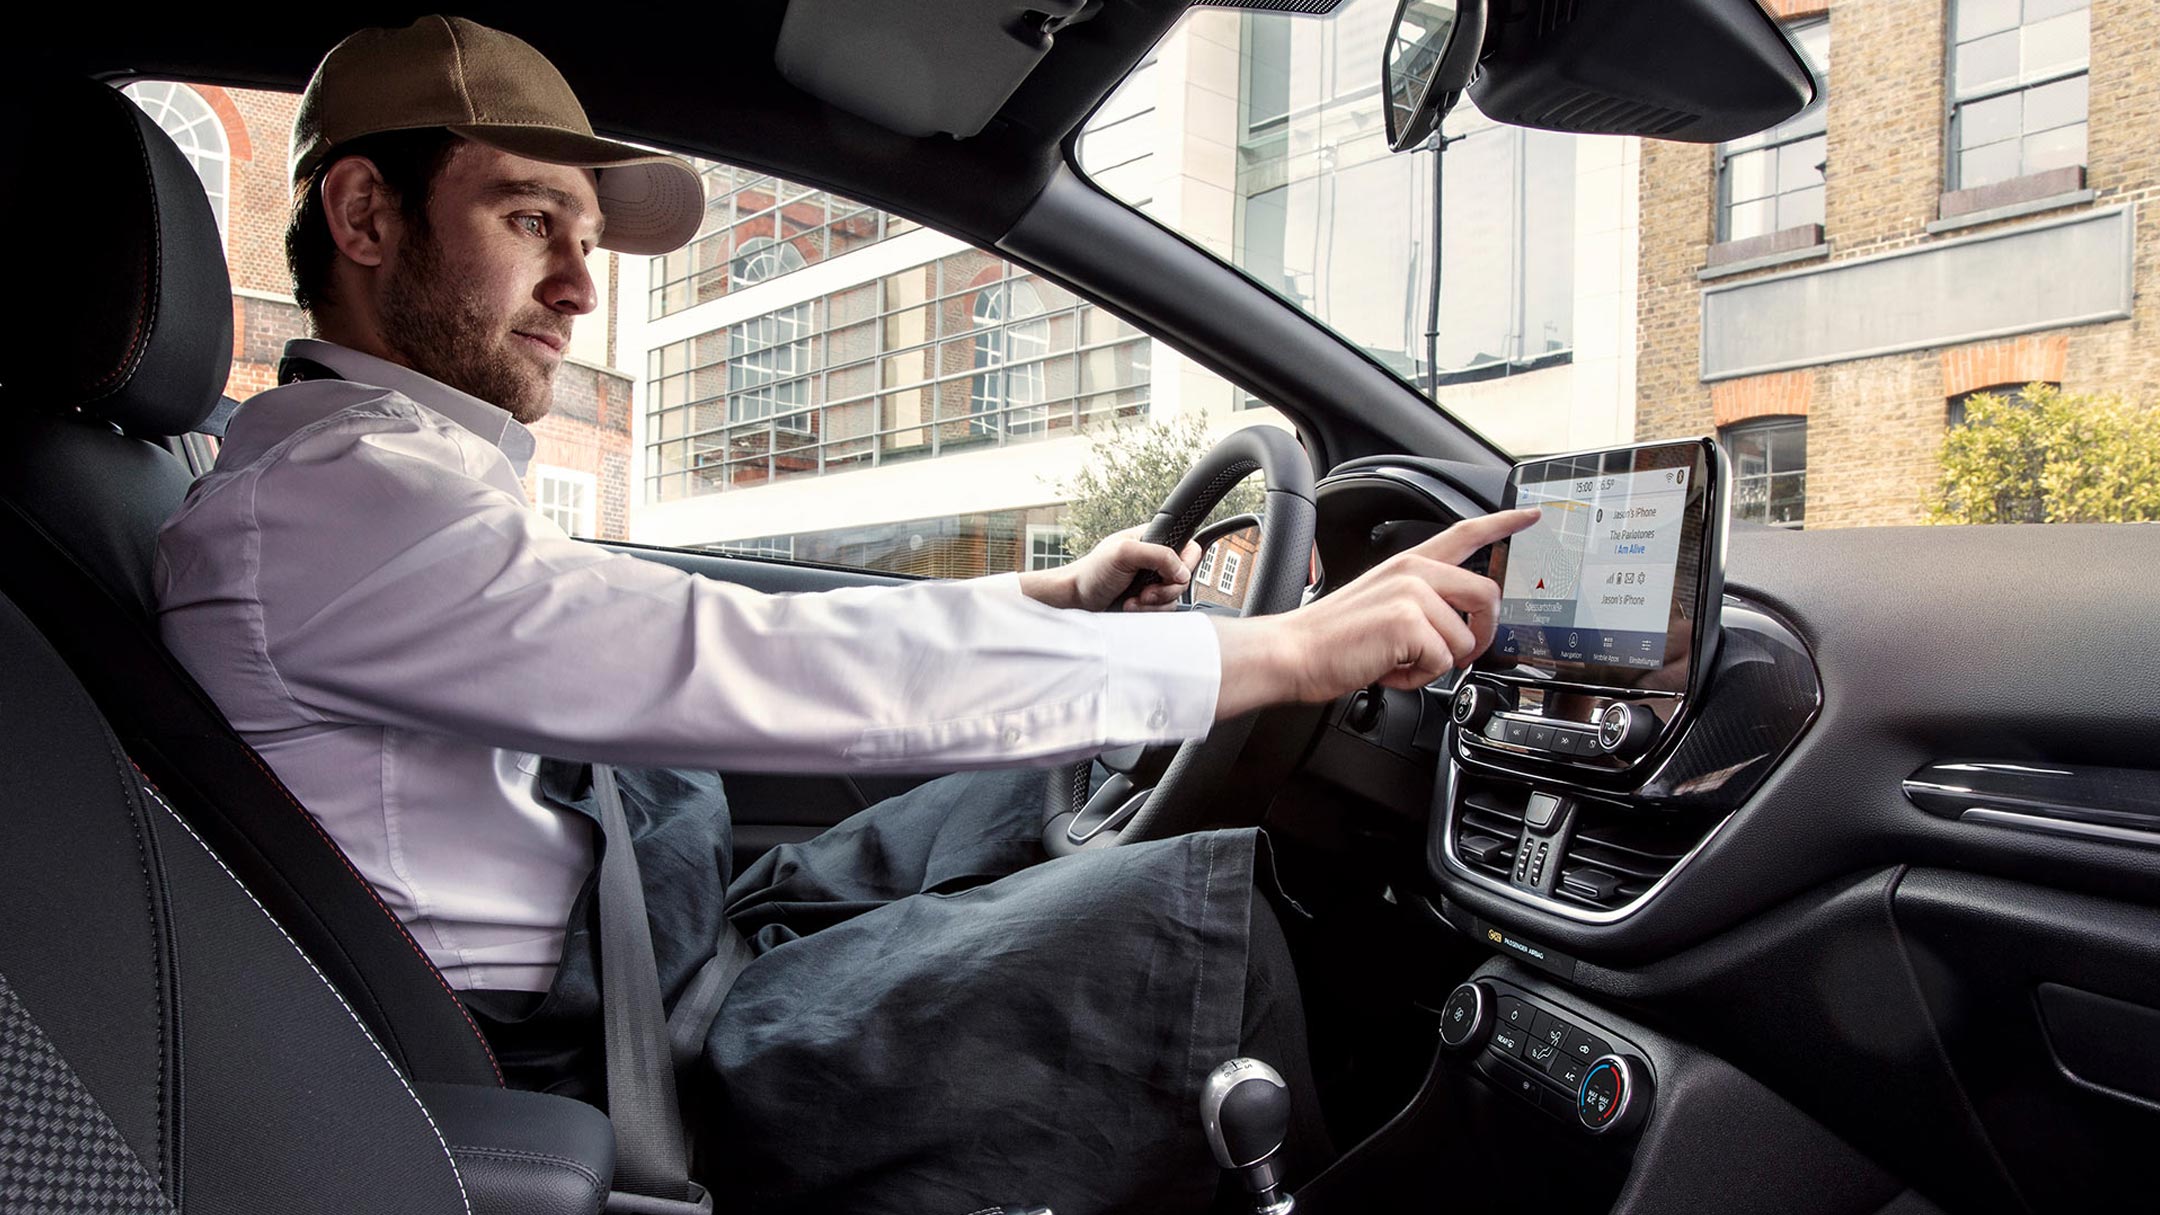 Ford Fiesta Van interior with man using the Ford Sync